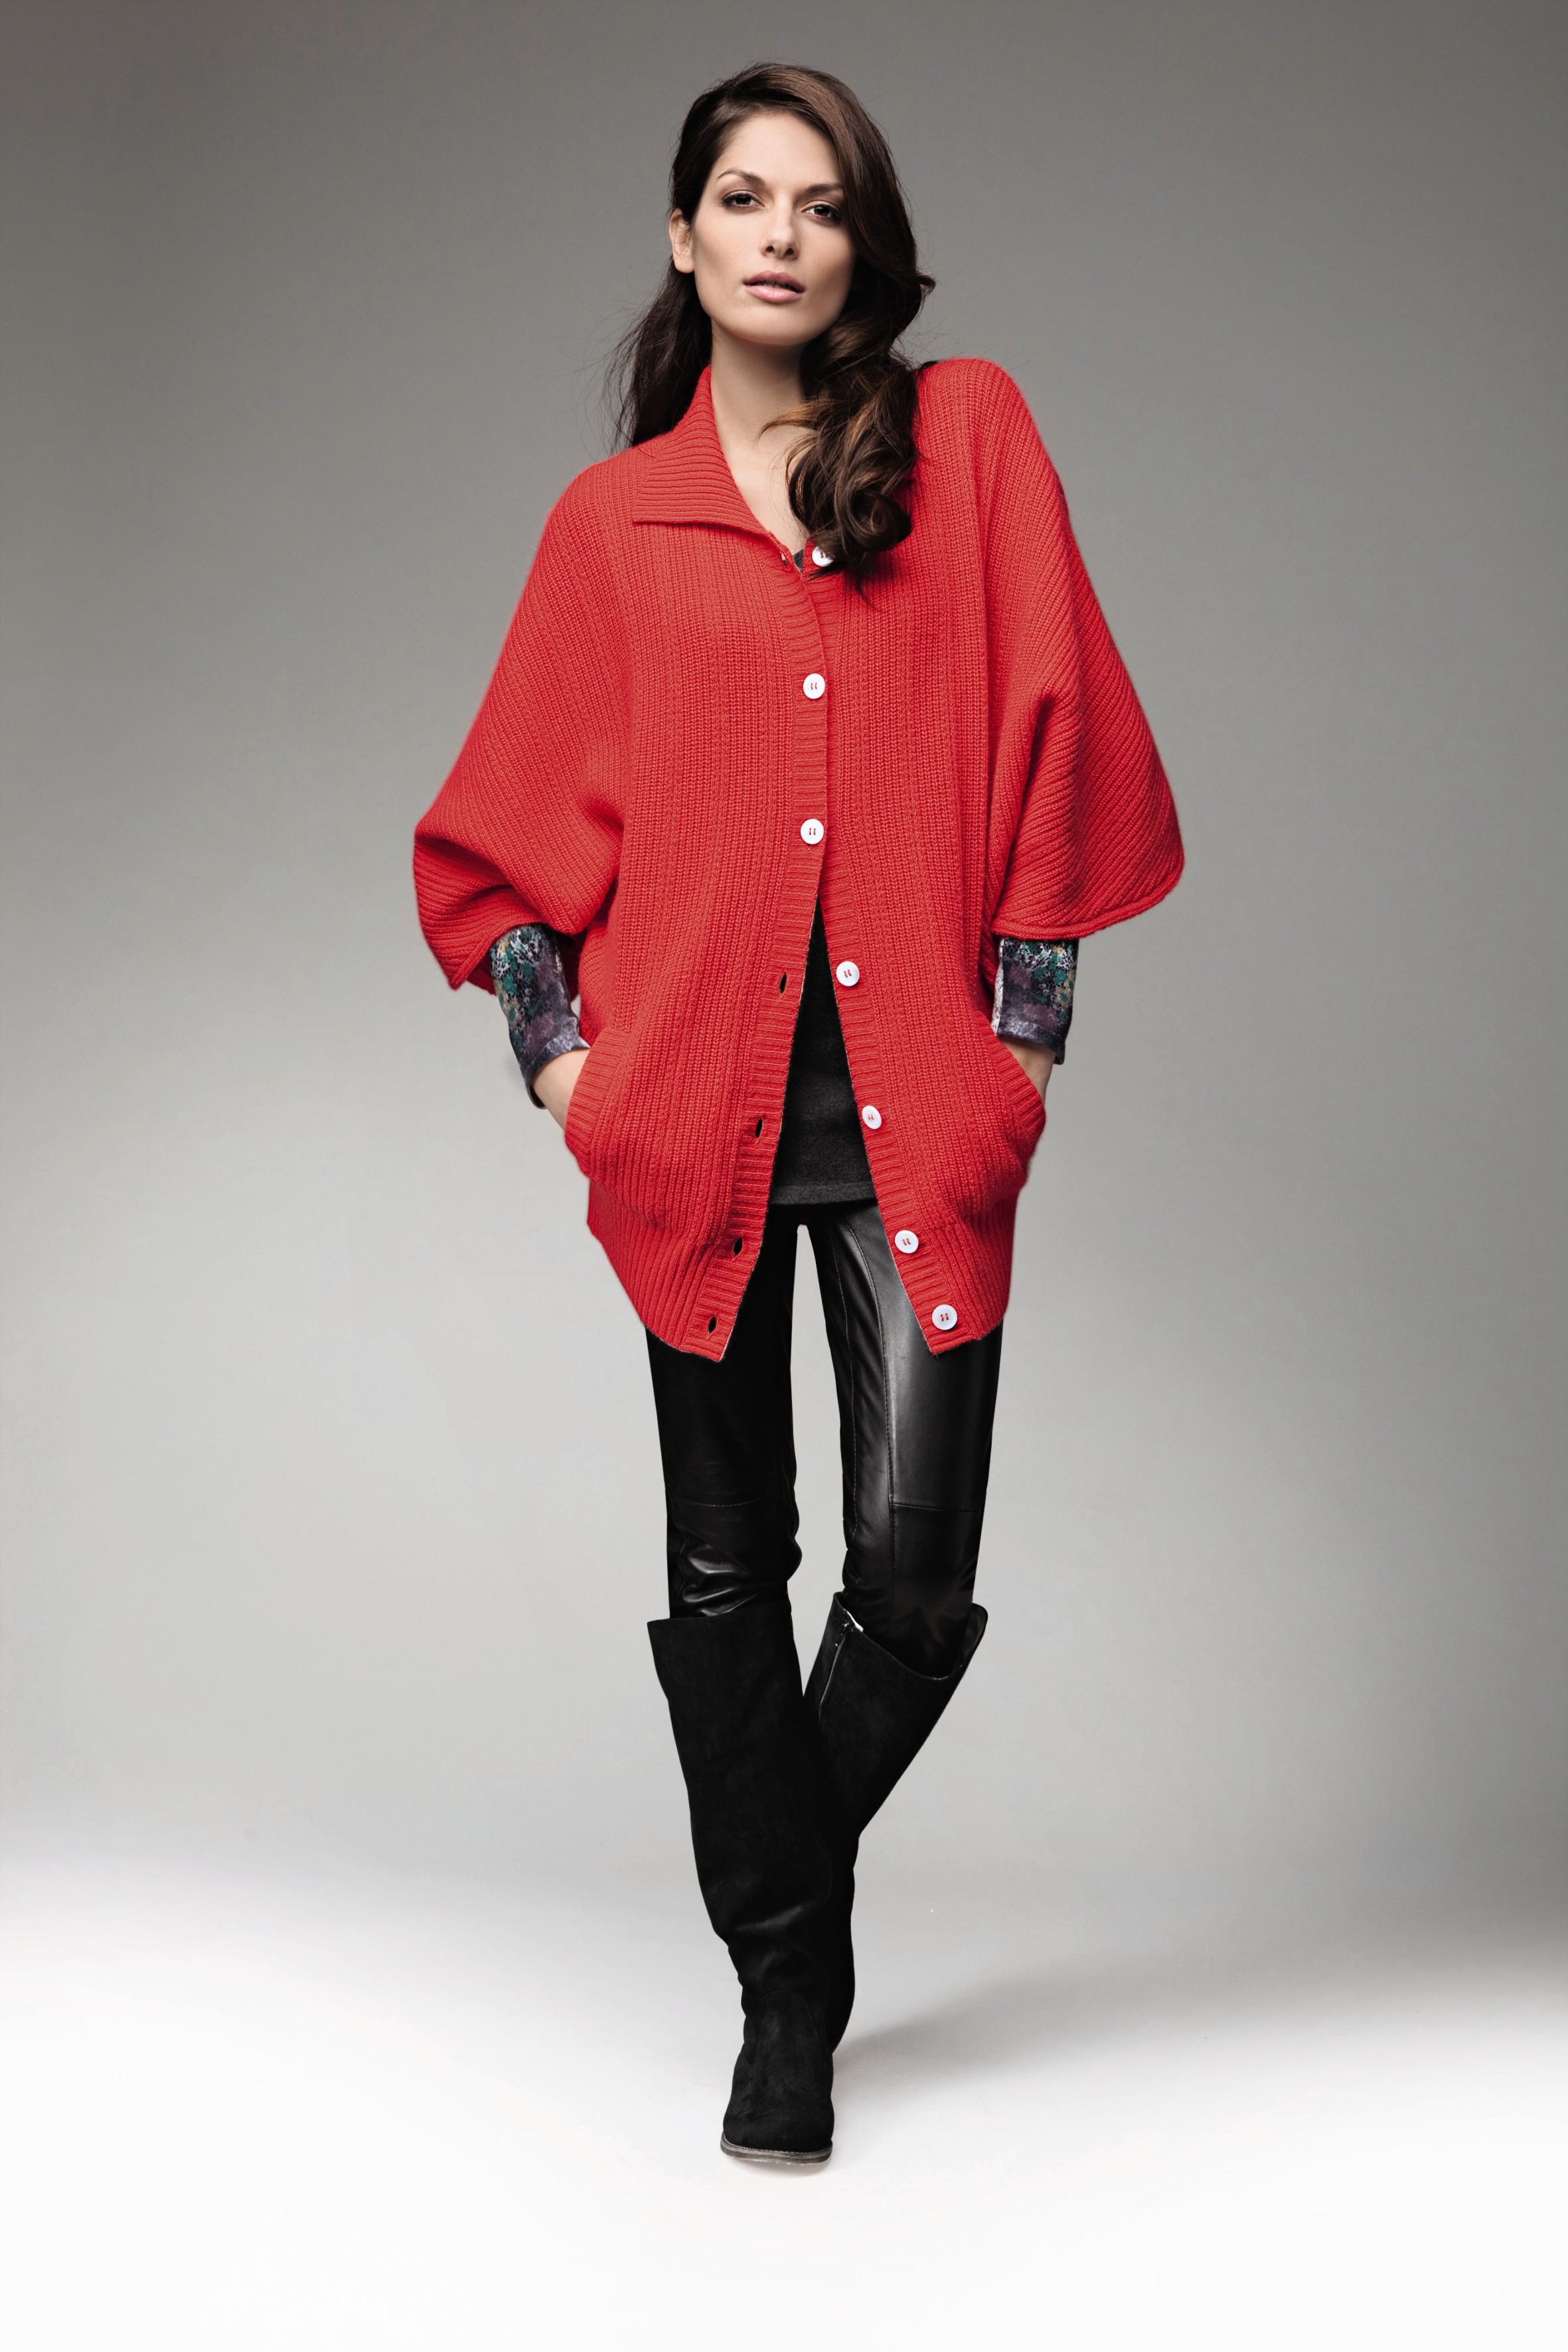 Elgance AW 2011 Collection 12